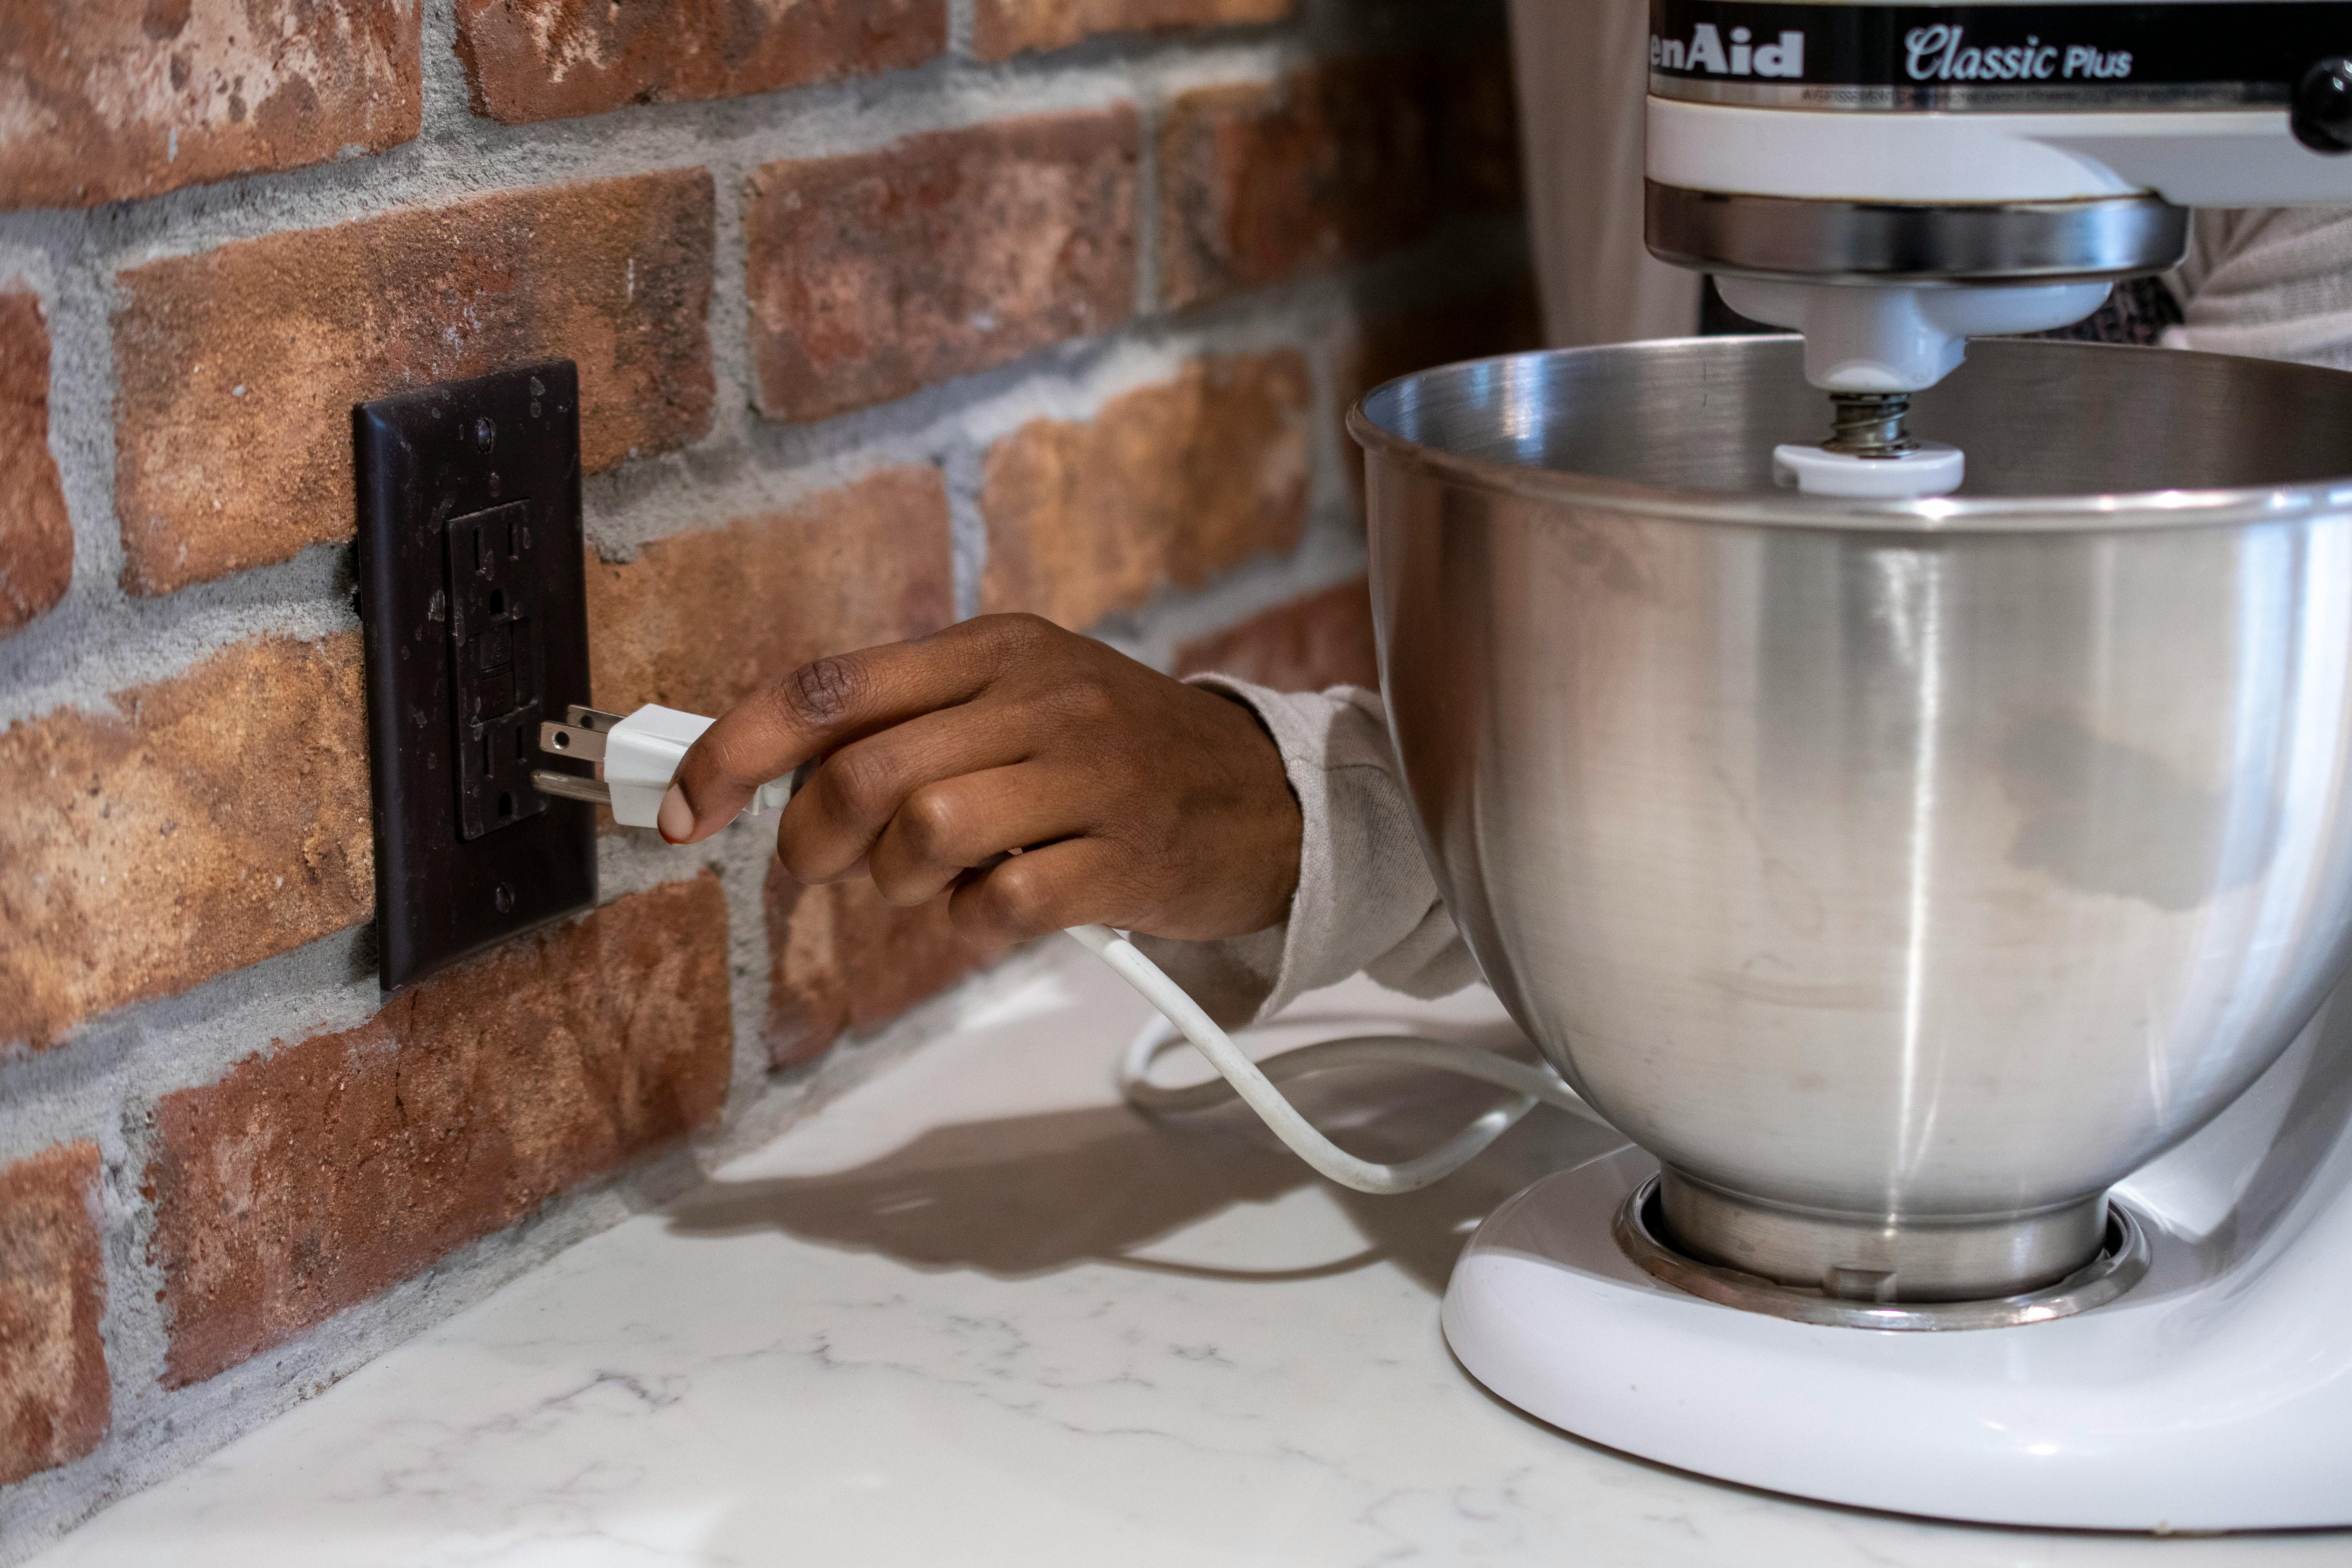 14 KitchenAid Maintenance You Need to Know - The Krazy Coupon Lady